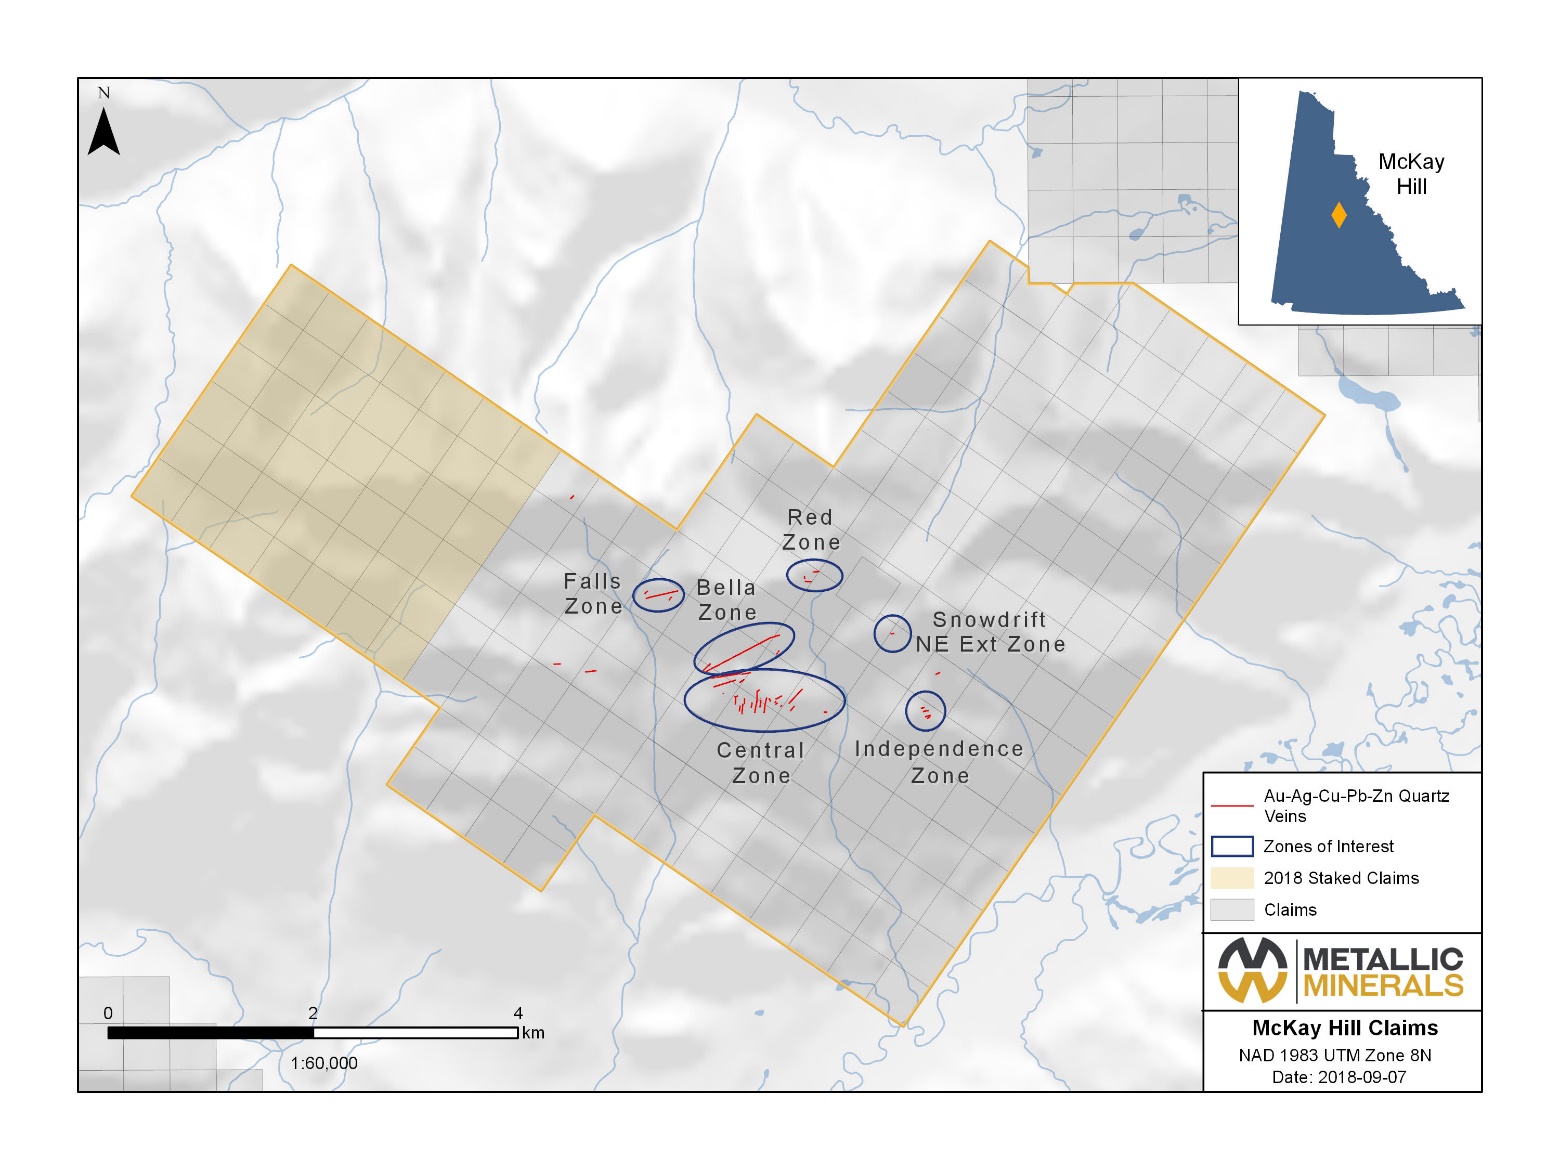 Figure 1: Map showing identified target areas and new claims at the McKay Hill Project.